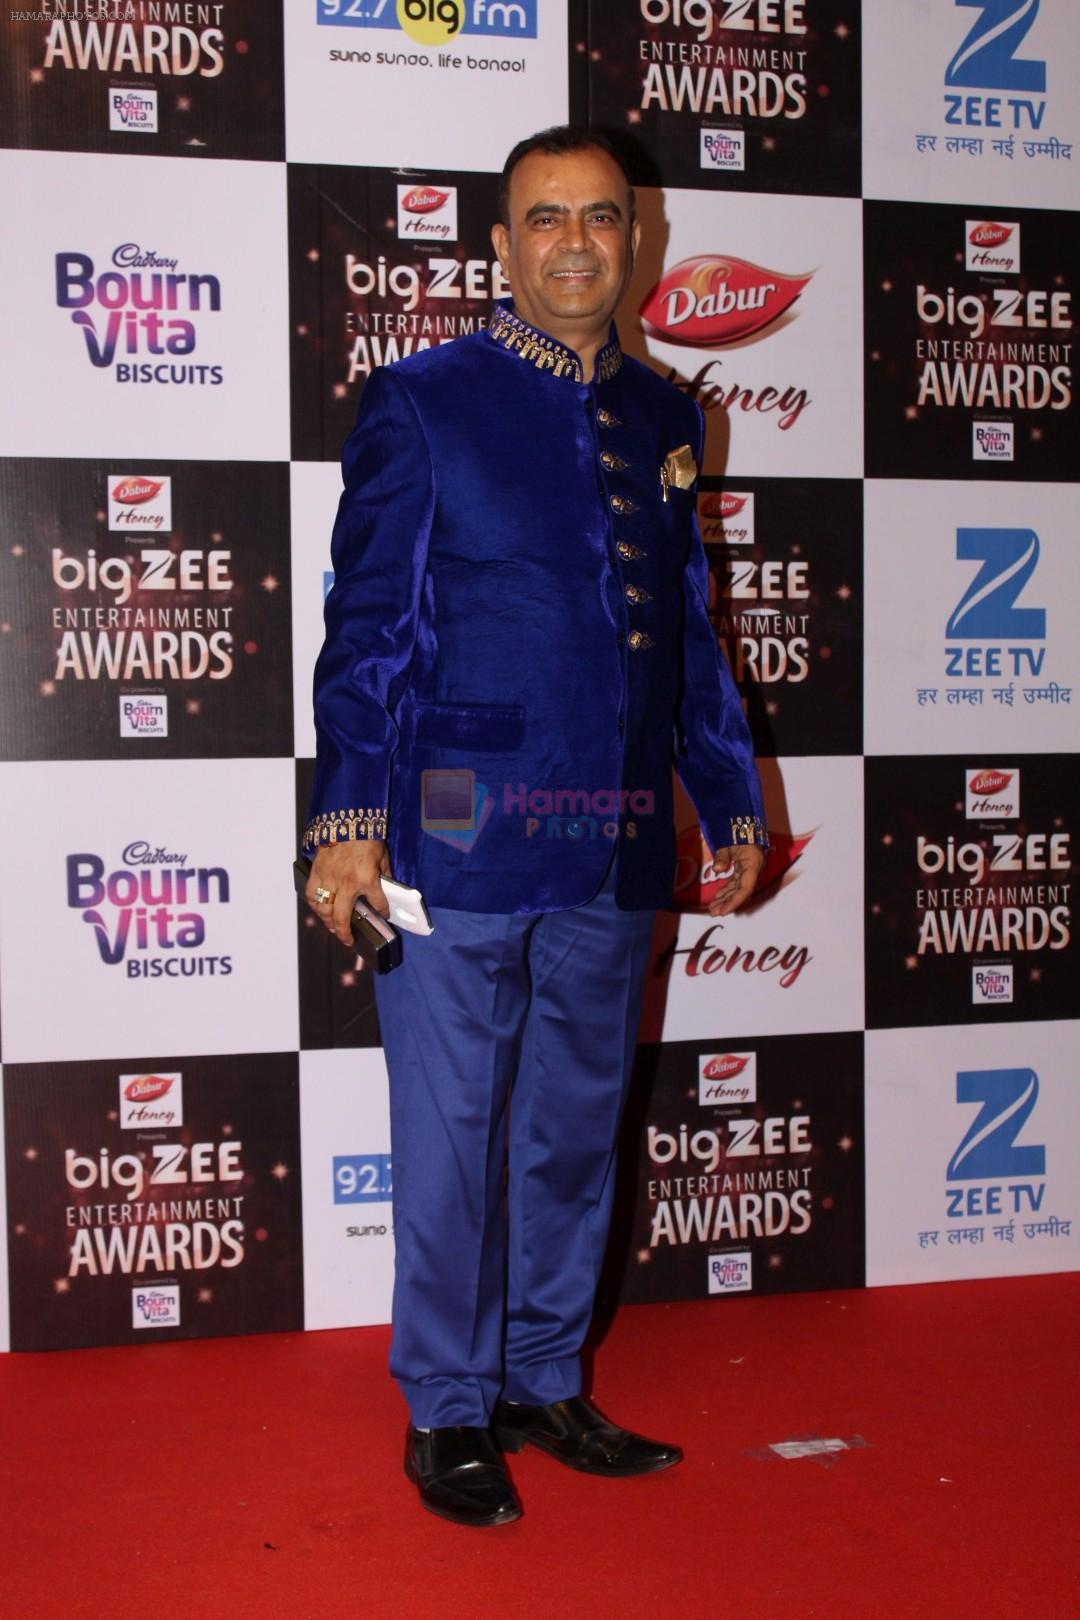 At Red Carpet Of Big Zee Entertainment Awards 2017 on 29th July 2017